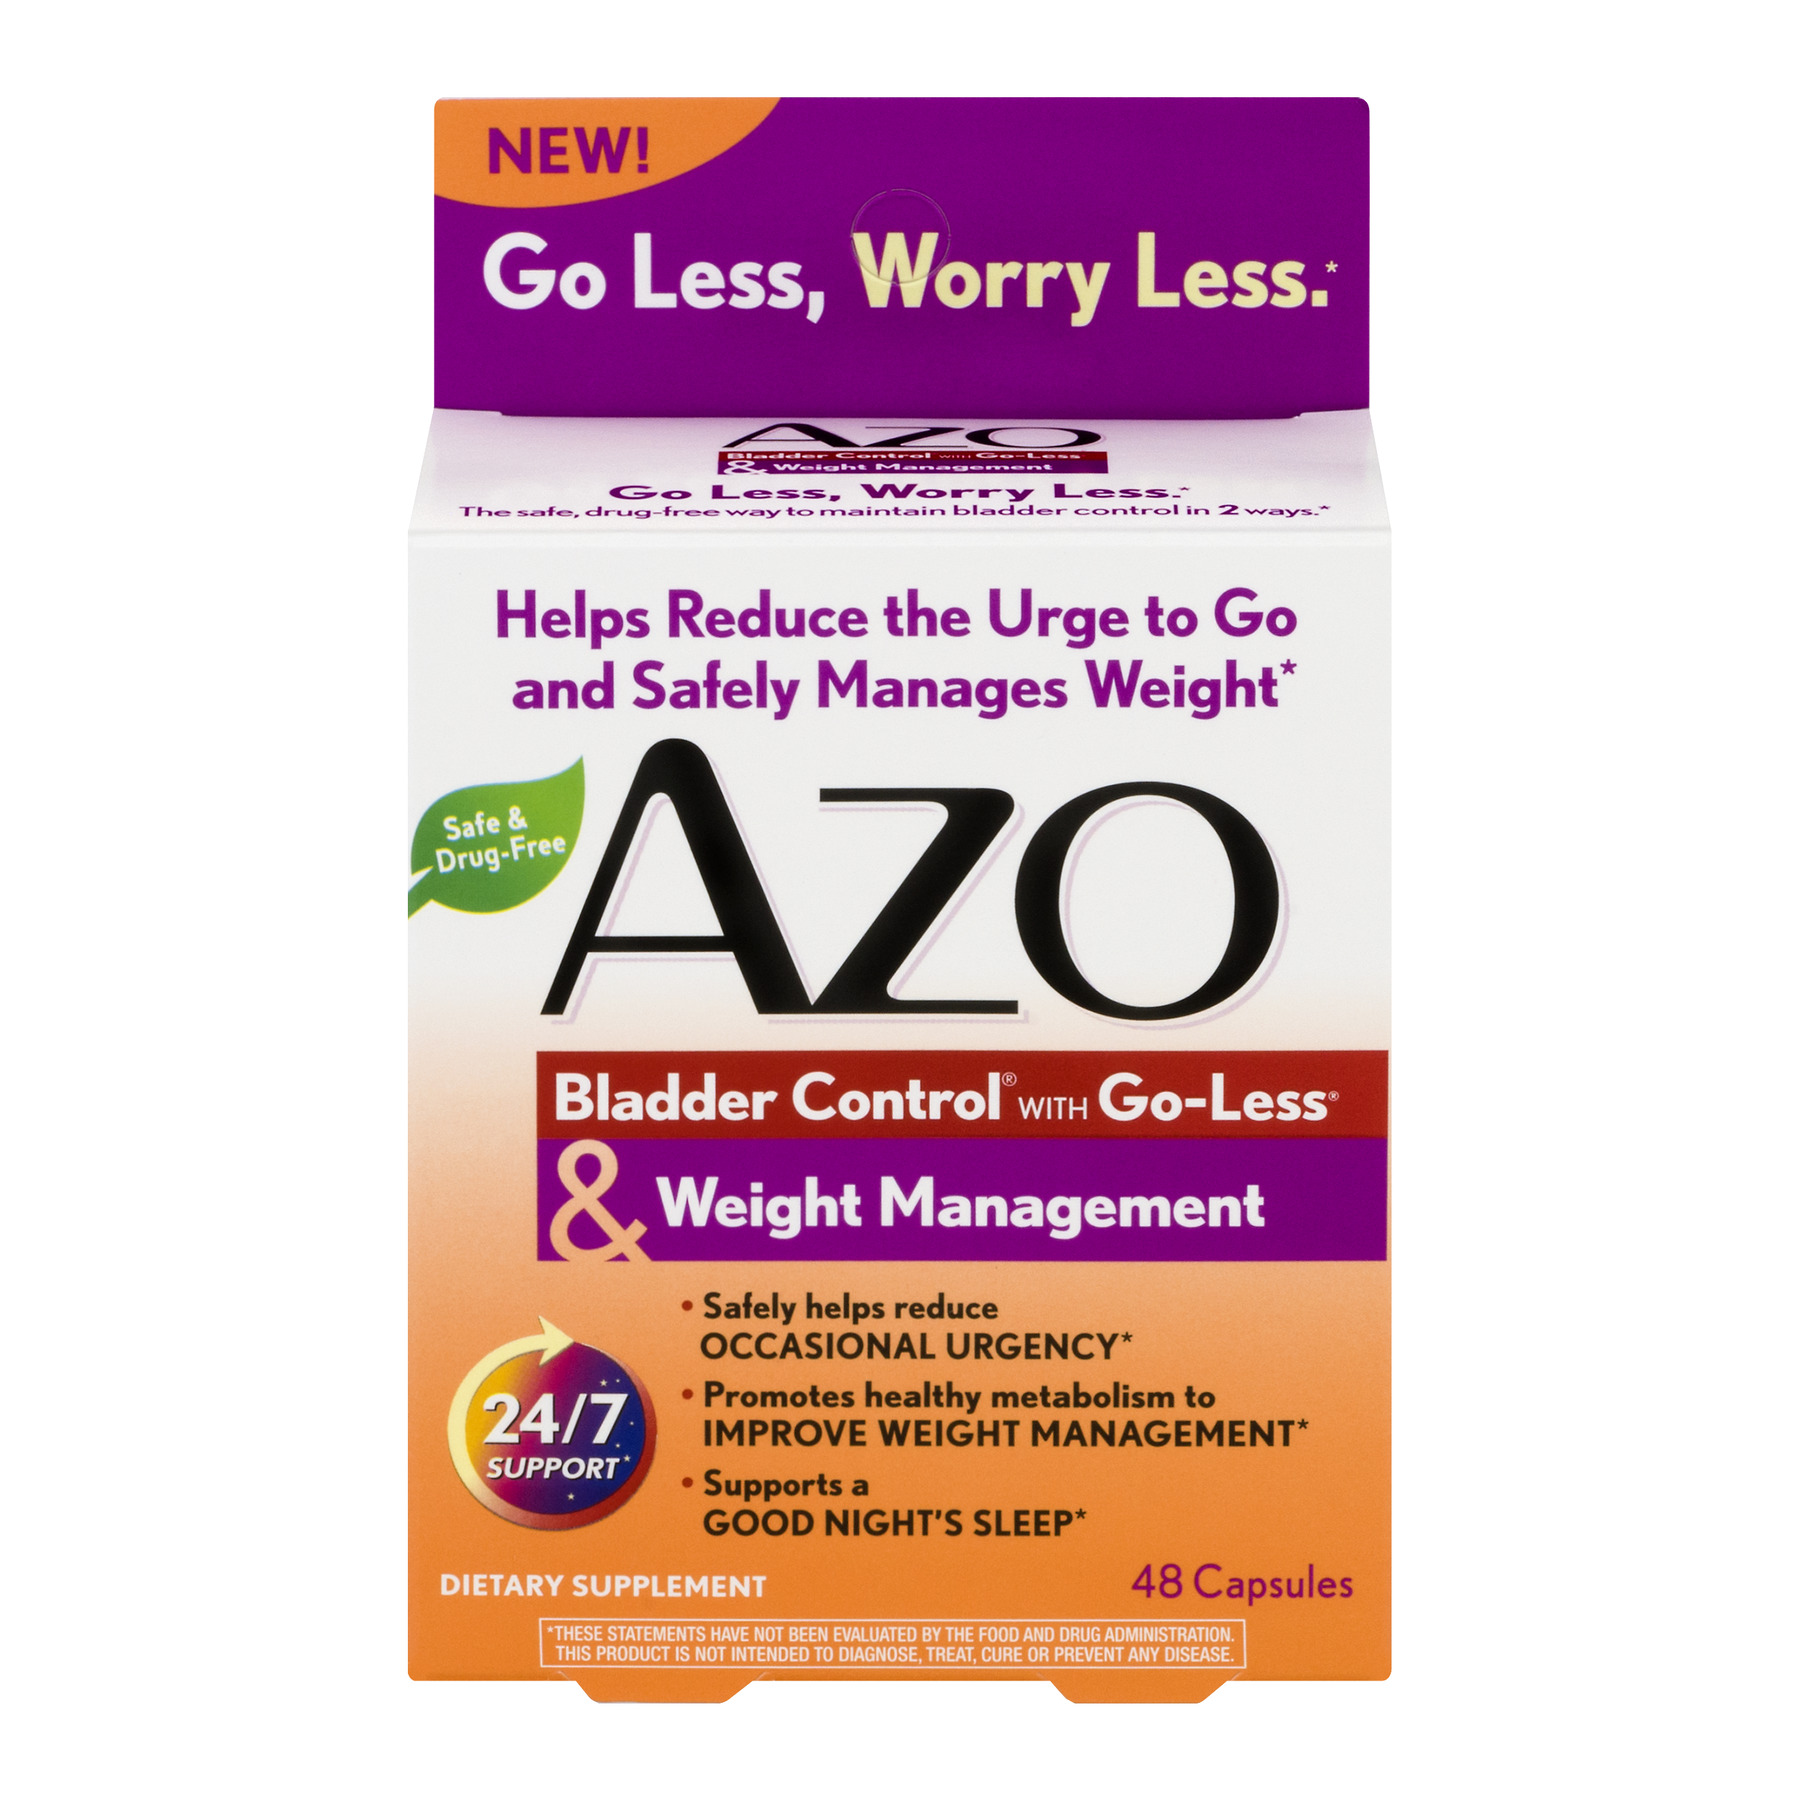 AZO Bladder Control and Weight Management Dietary Supplement, 48 Capsules - image 1 of 8